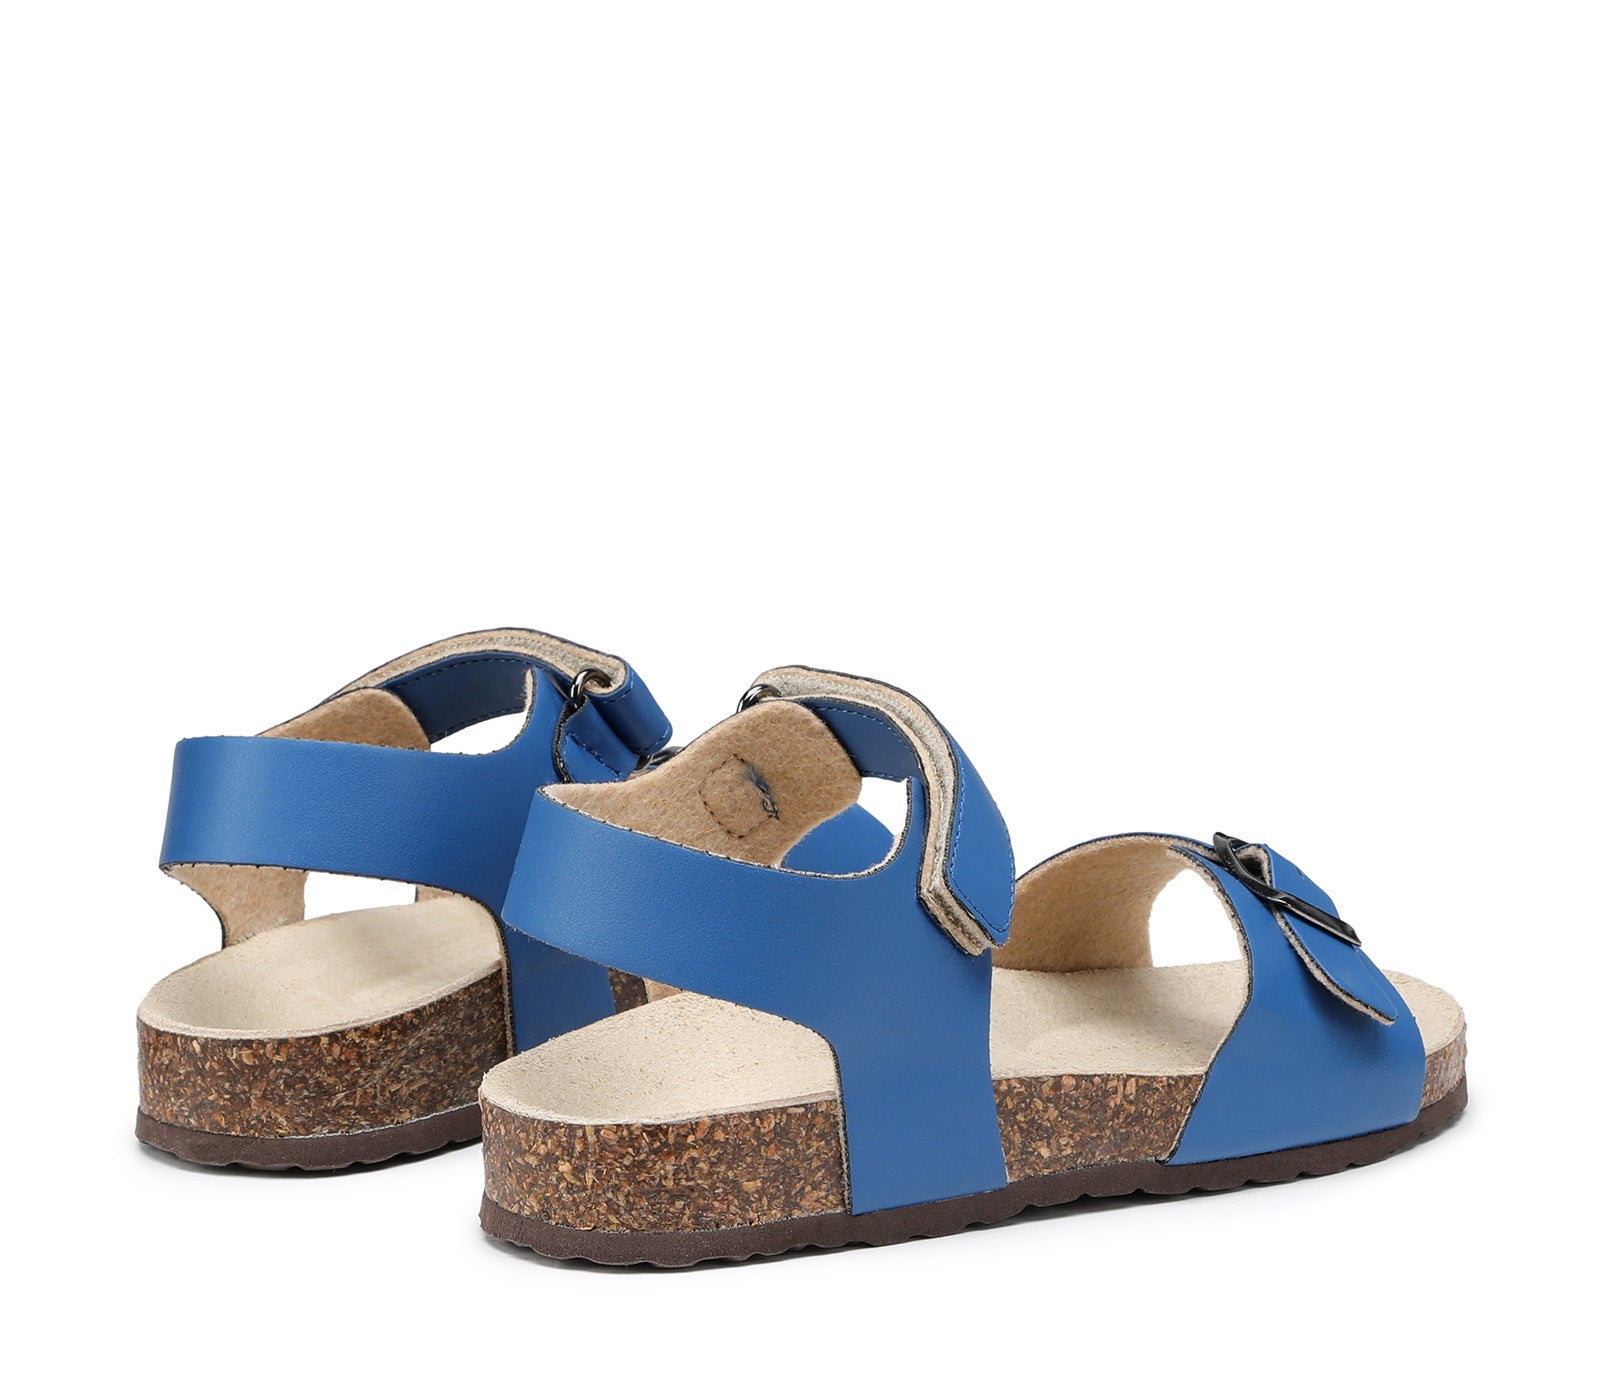 Royal Blue Children's Sandals with Velcro Closure and Contoured Insole